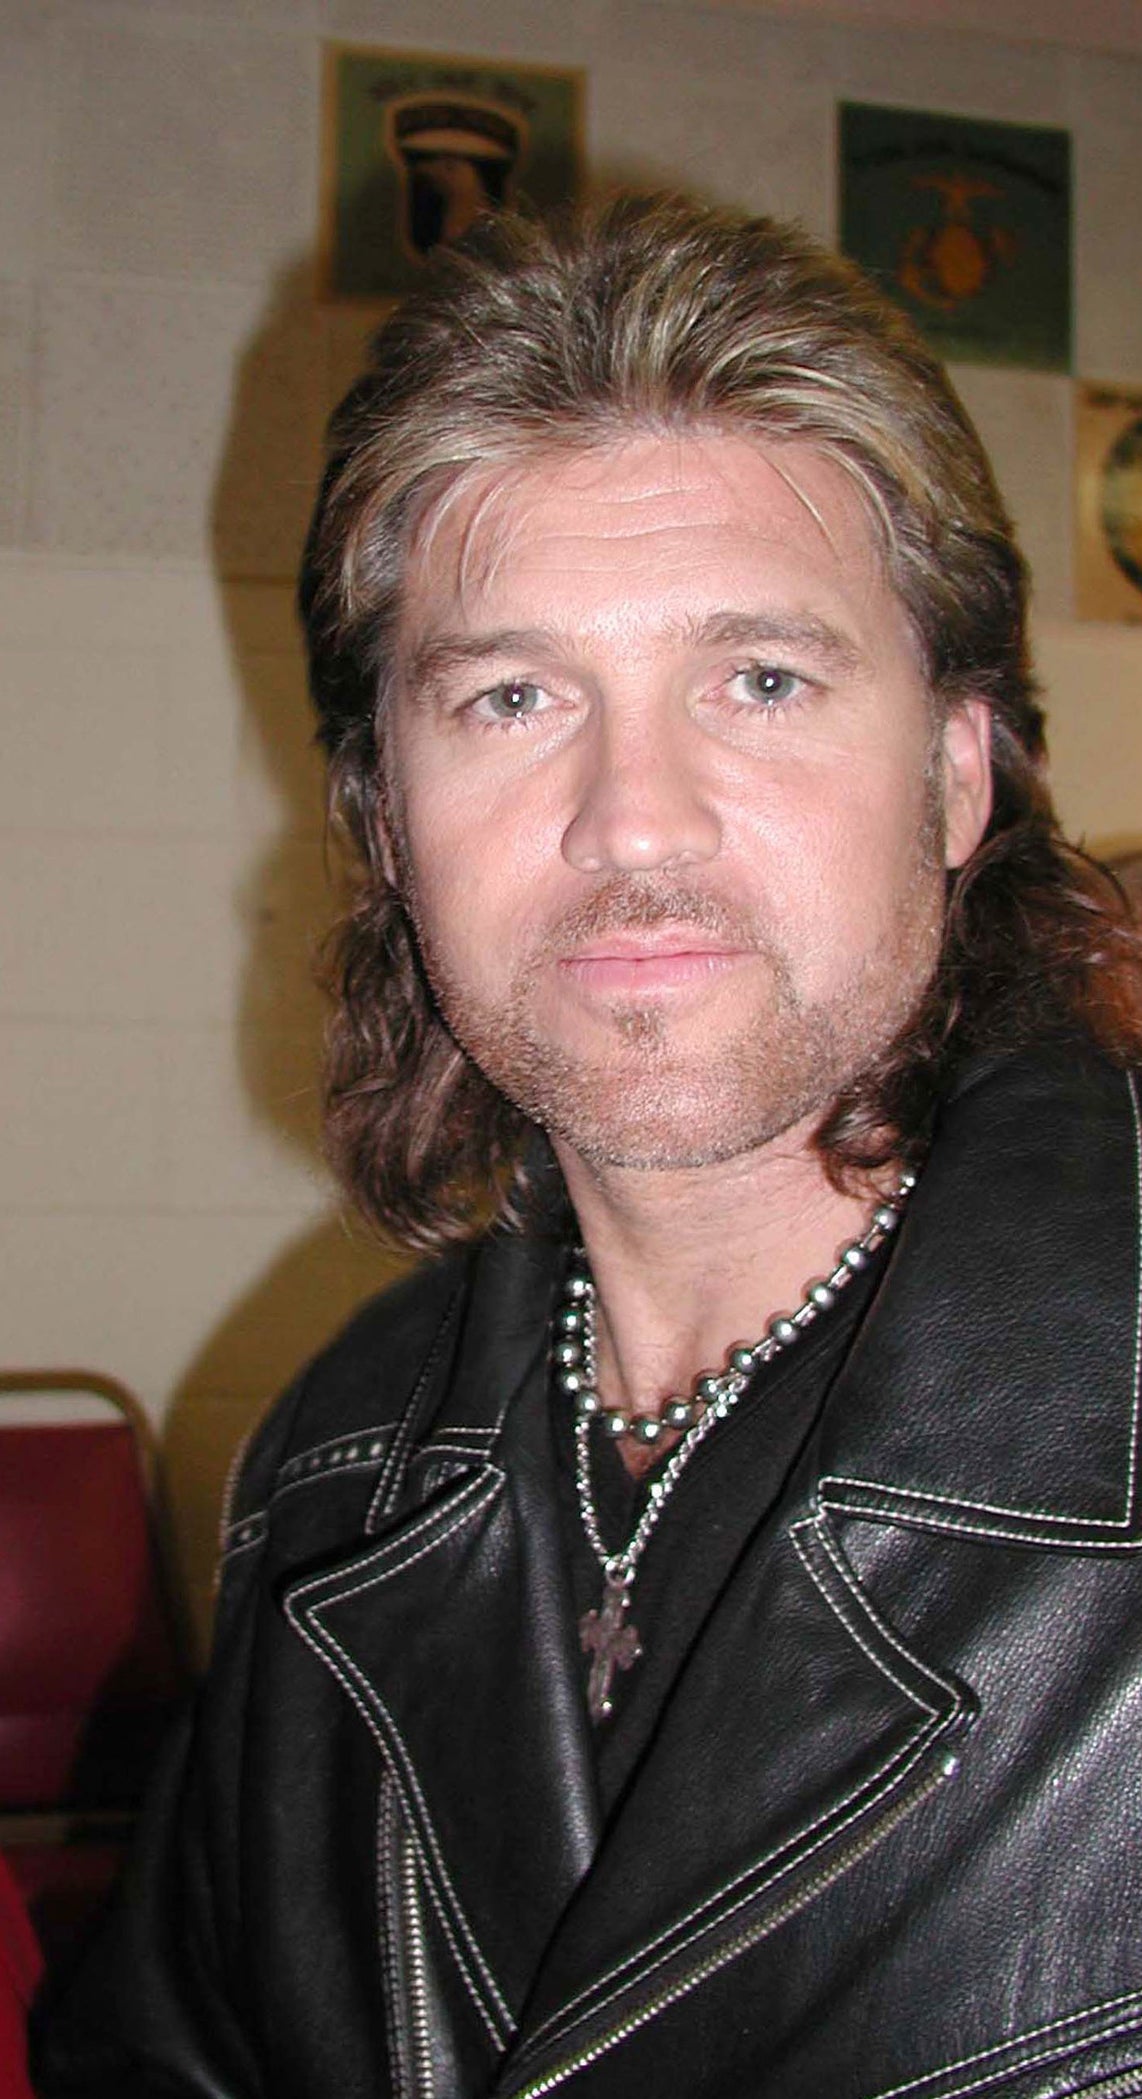 Billy Ray Cyrus Hairstyle - Scene Haircuts Mullet Emo Hairstyle - The cyrus family could use some prayers of comfort right now.